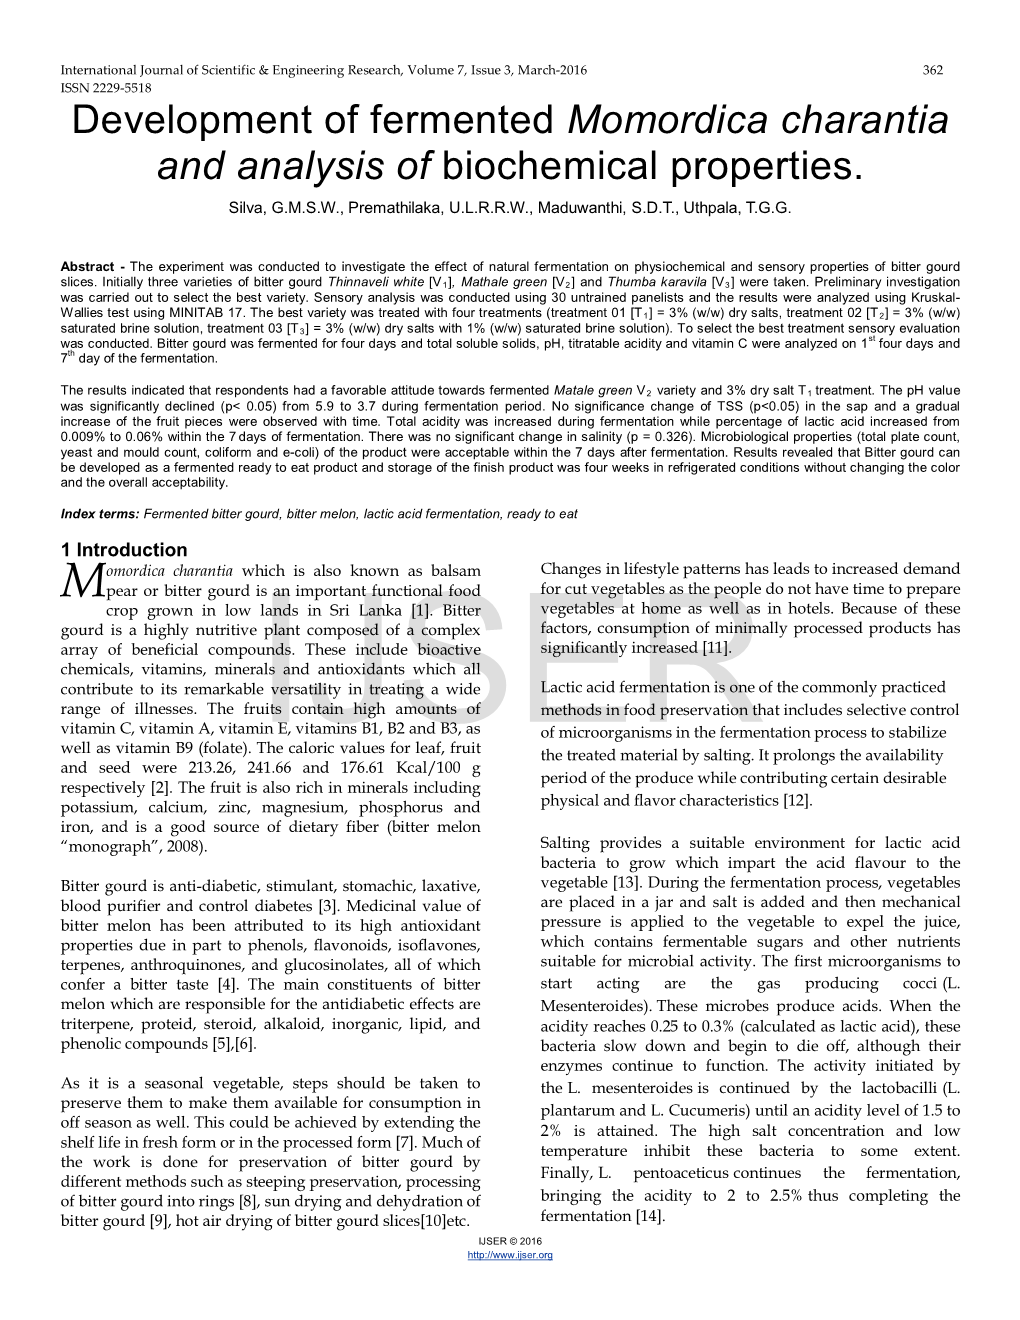 Development of Fermented Momordica Charantia and Analysis of Biochemical Properties